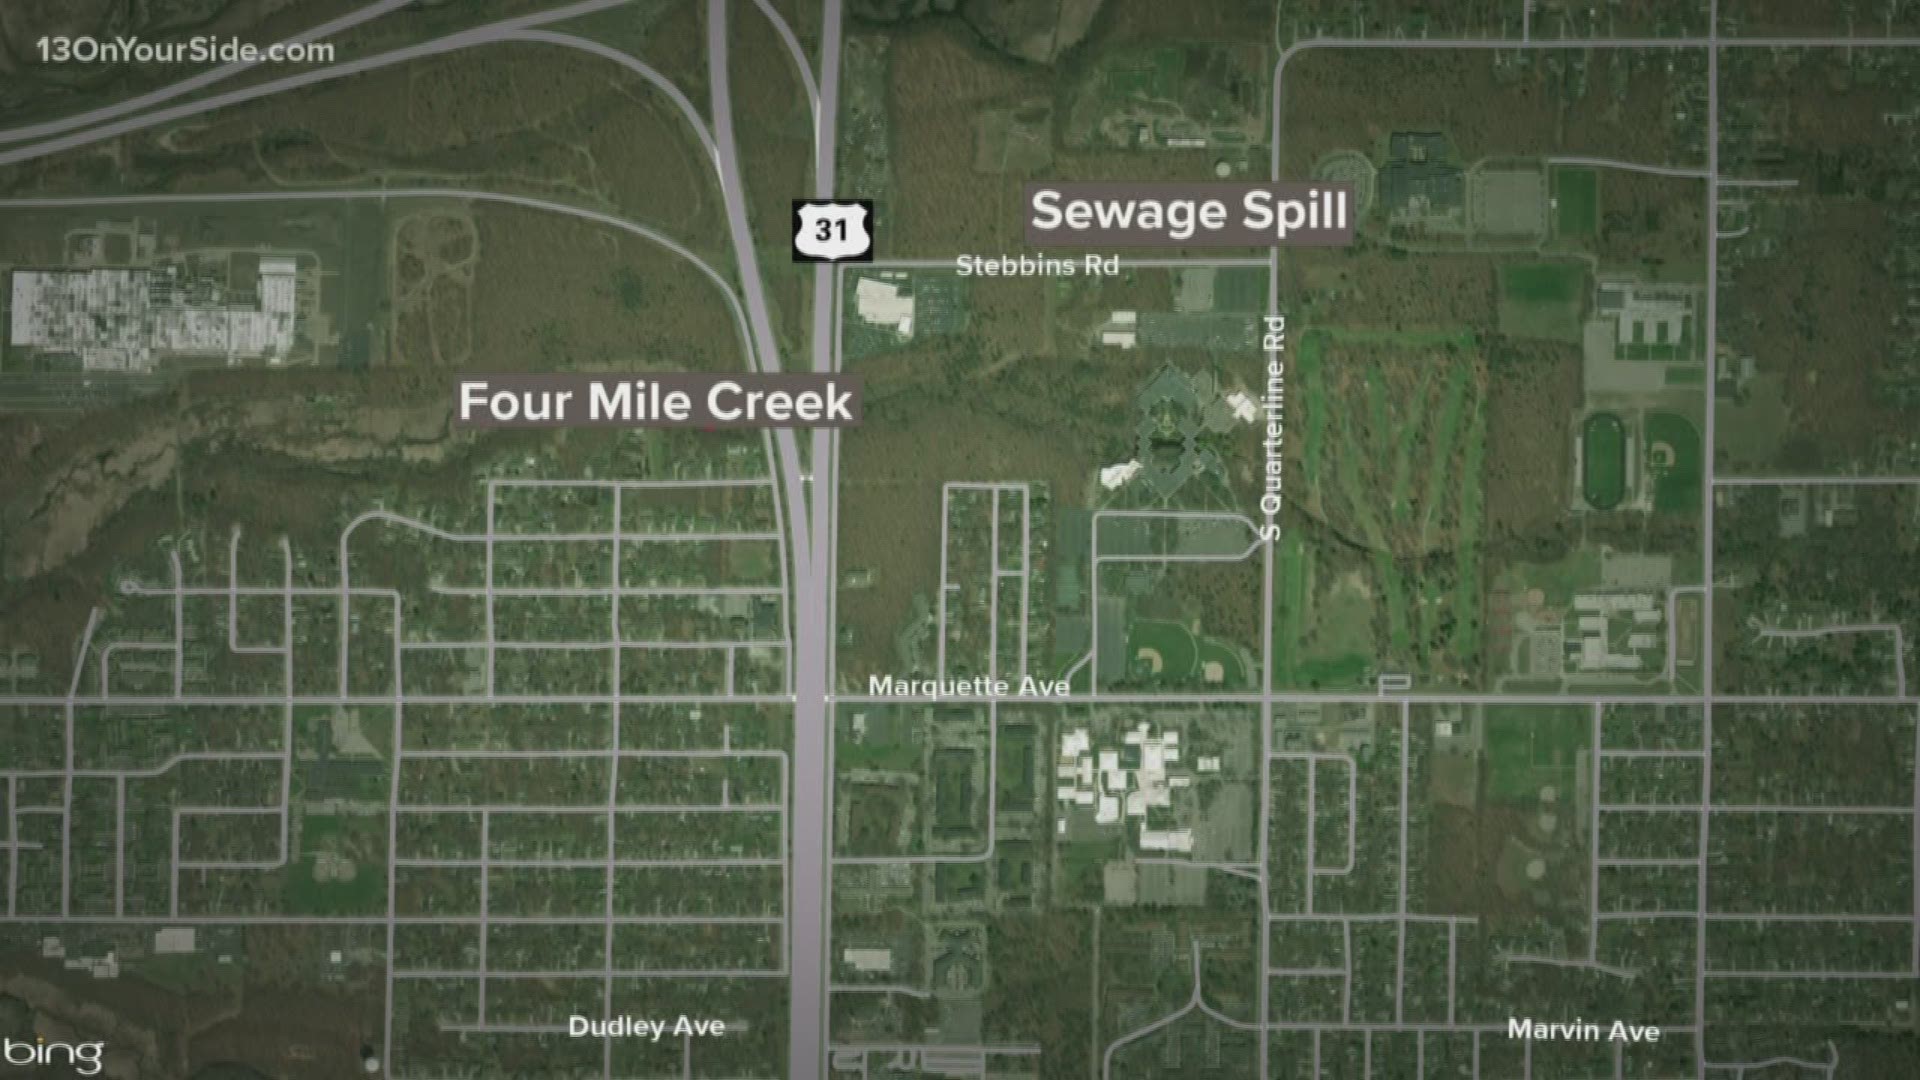 It was previously reported that more than 130,000 gallons of sewage were spilled, but it was later determined to be 20,000 gallons.